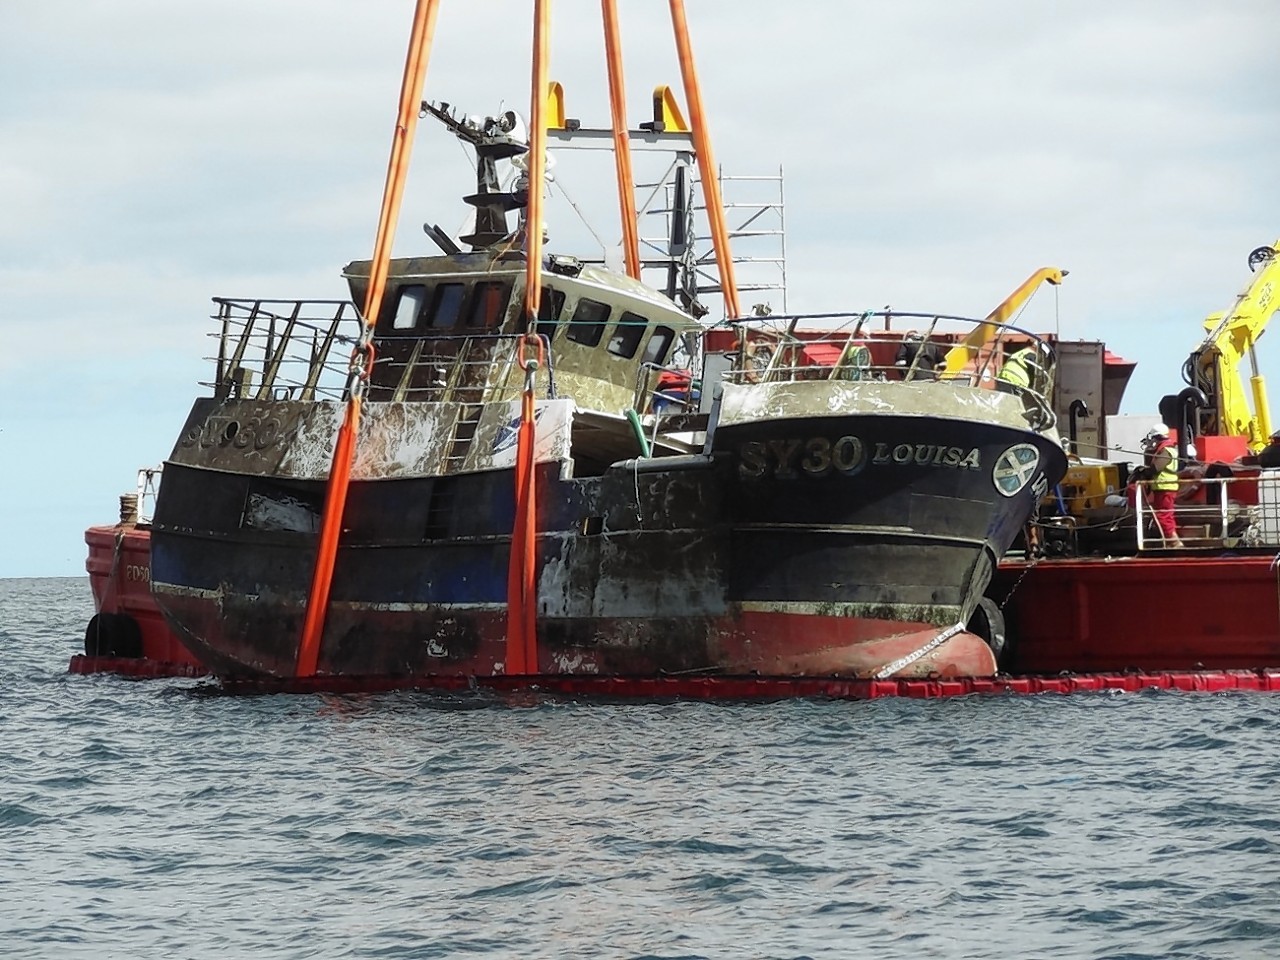 MFV Louisa being recovered after the sinking